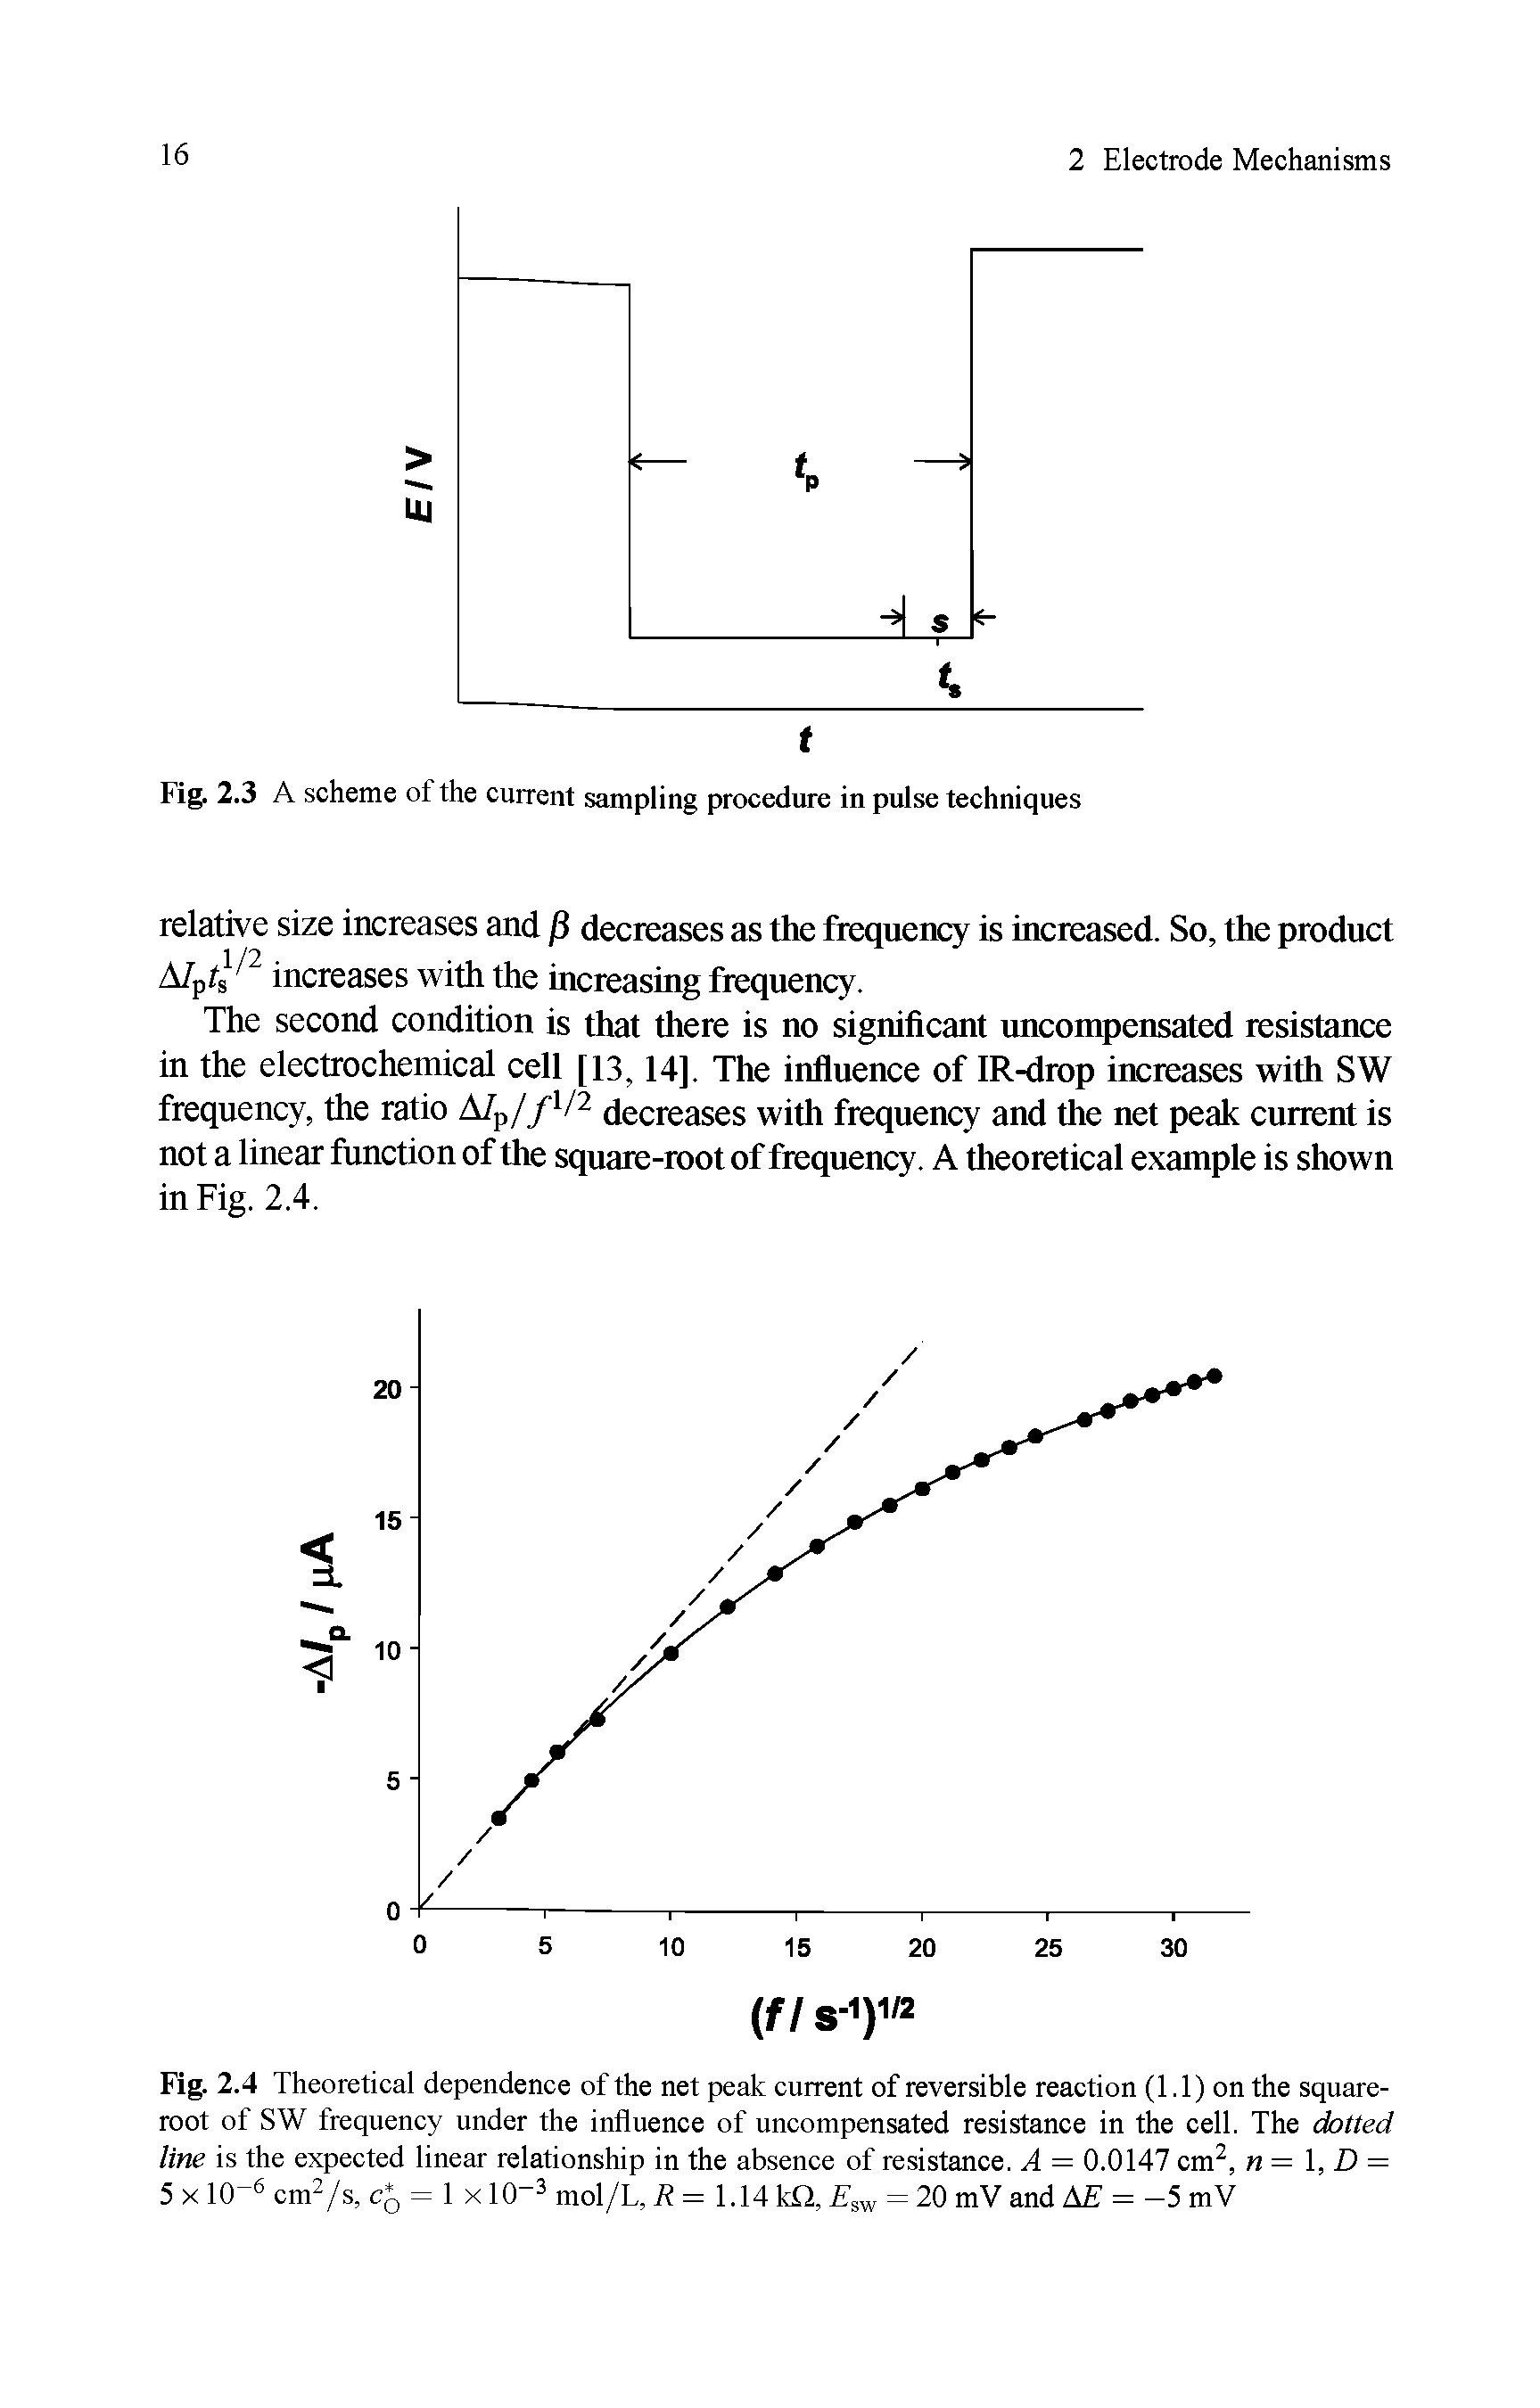 Fig. 2.4 Theoretical dependence of the net peak current of reversible reaction (1.1) on the square-root of SW frequency under the influence of uncompensated resistance in the cell. The dotted line is the expected linear relationship in the absence of resistance. A = 0.0147 cm, n=l,D = 5 X 10- cmVs, cj, = 1 X10-3 = U4 k 2, = 20 mV and AS = -5 mV...